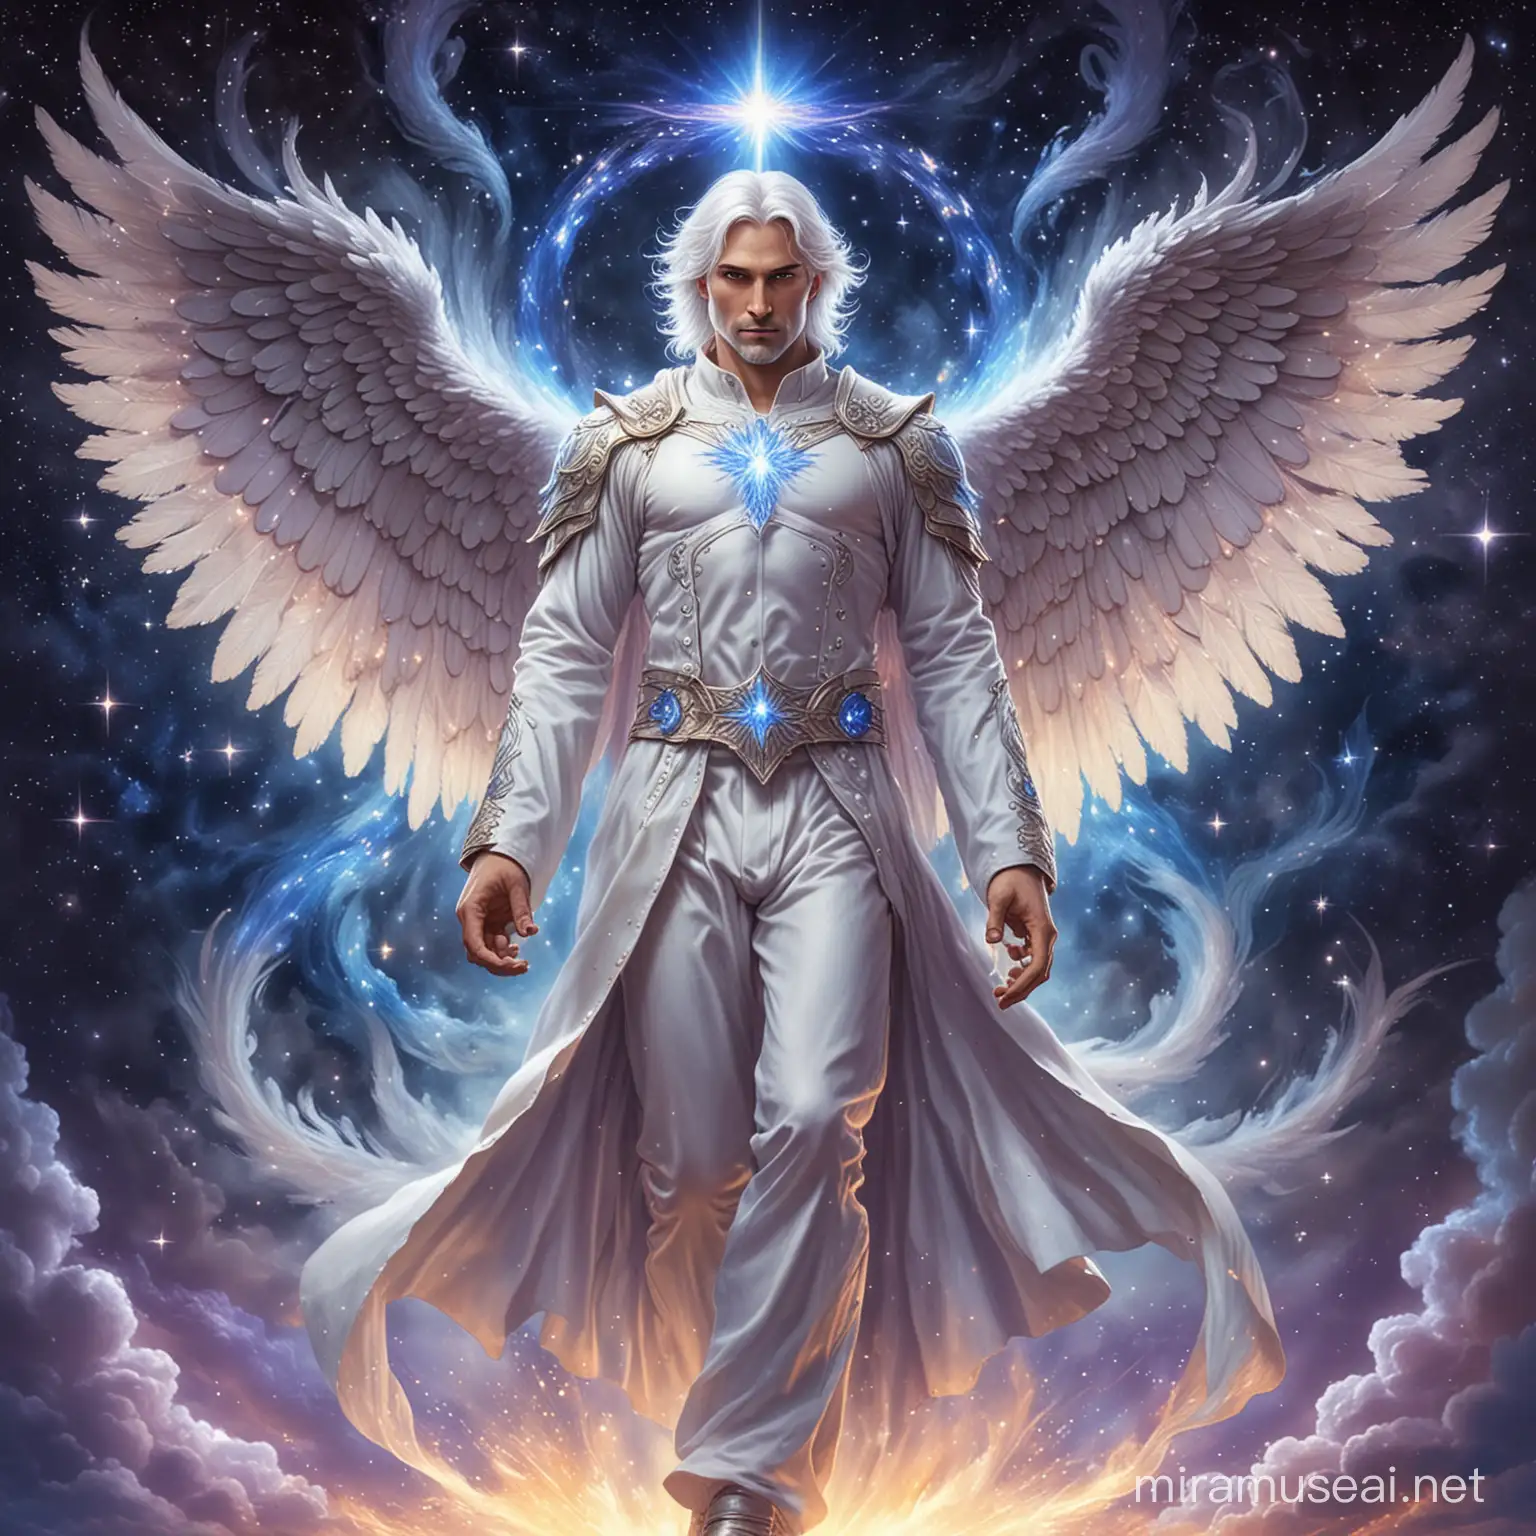 Powerful Guardian Angel with Burning Blue Flame Wings in Starry Cosmos